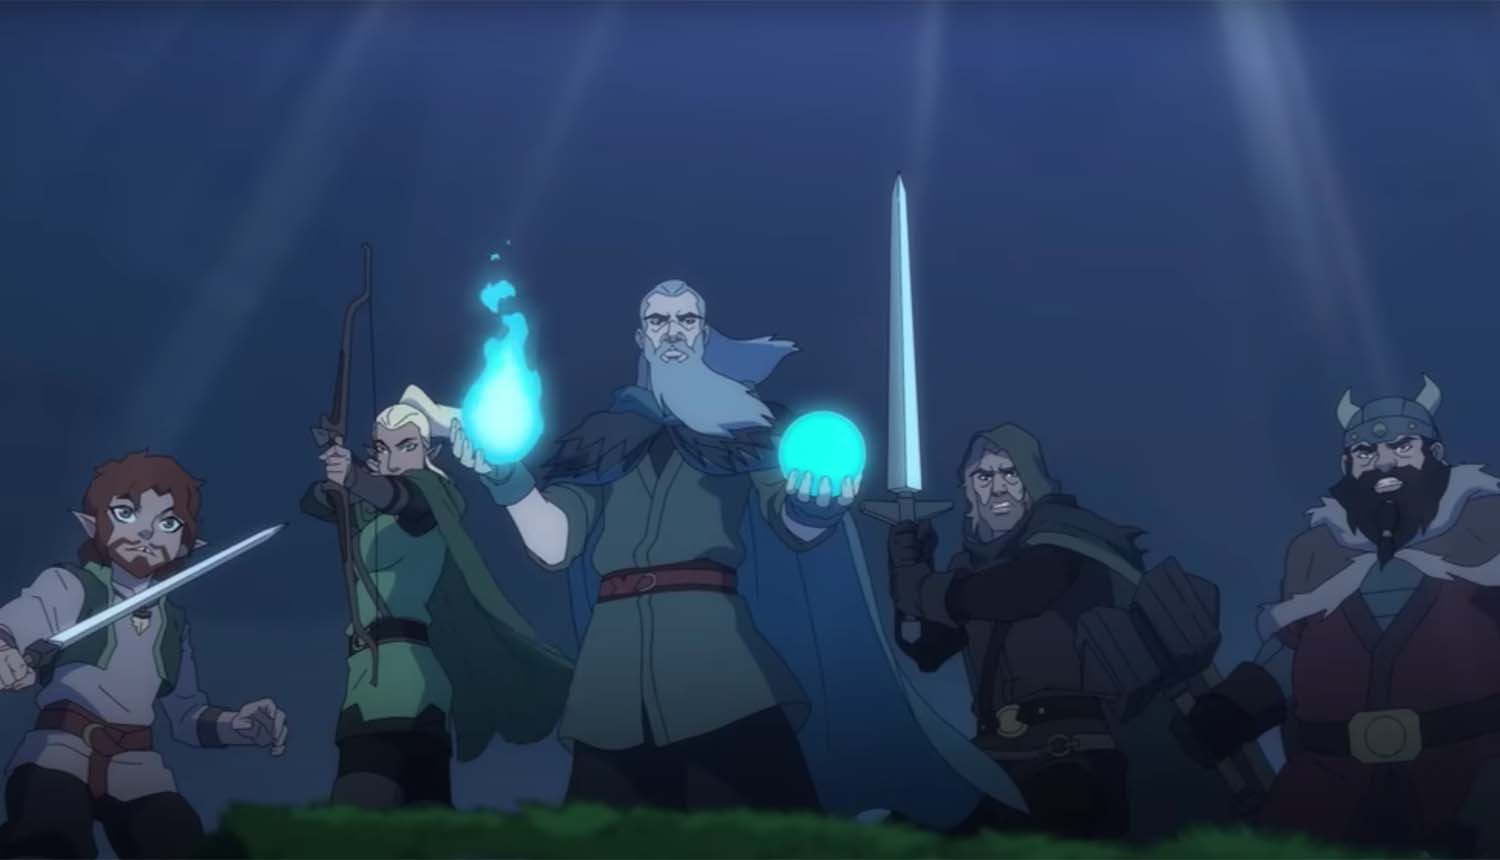 REVIEW: The Legend of Vox Machina Season 1 (2022) - Geeks + Gamers